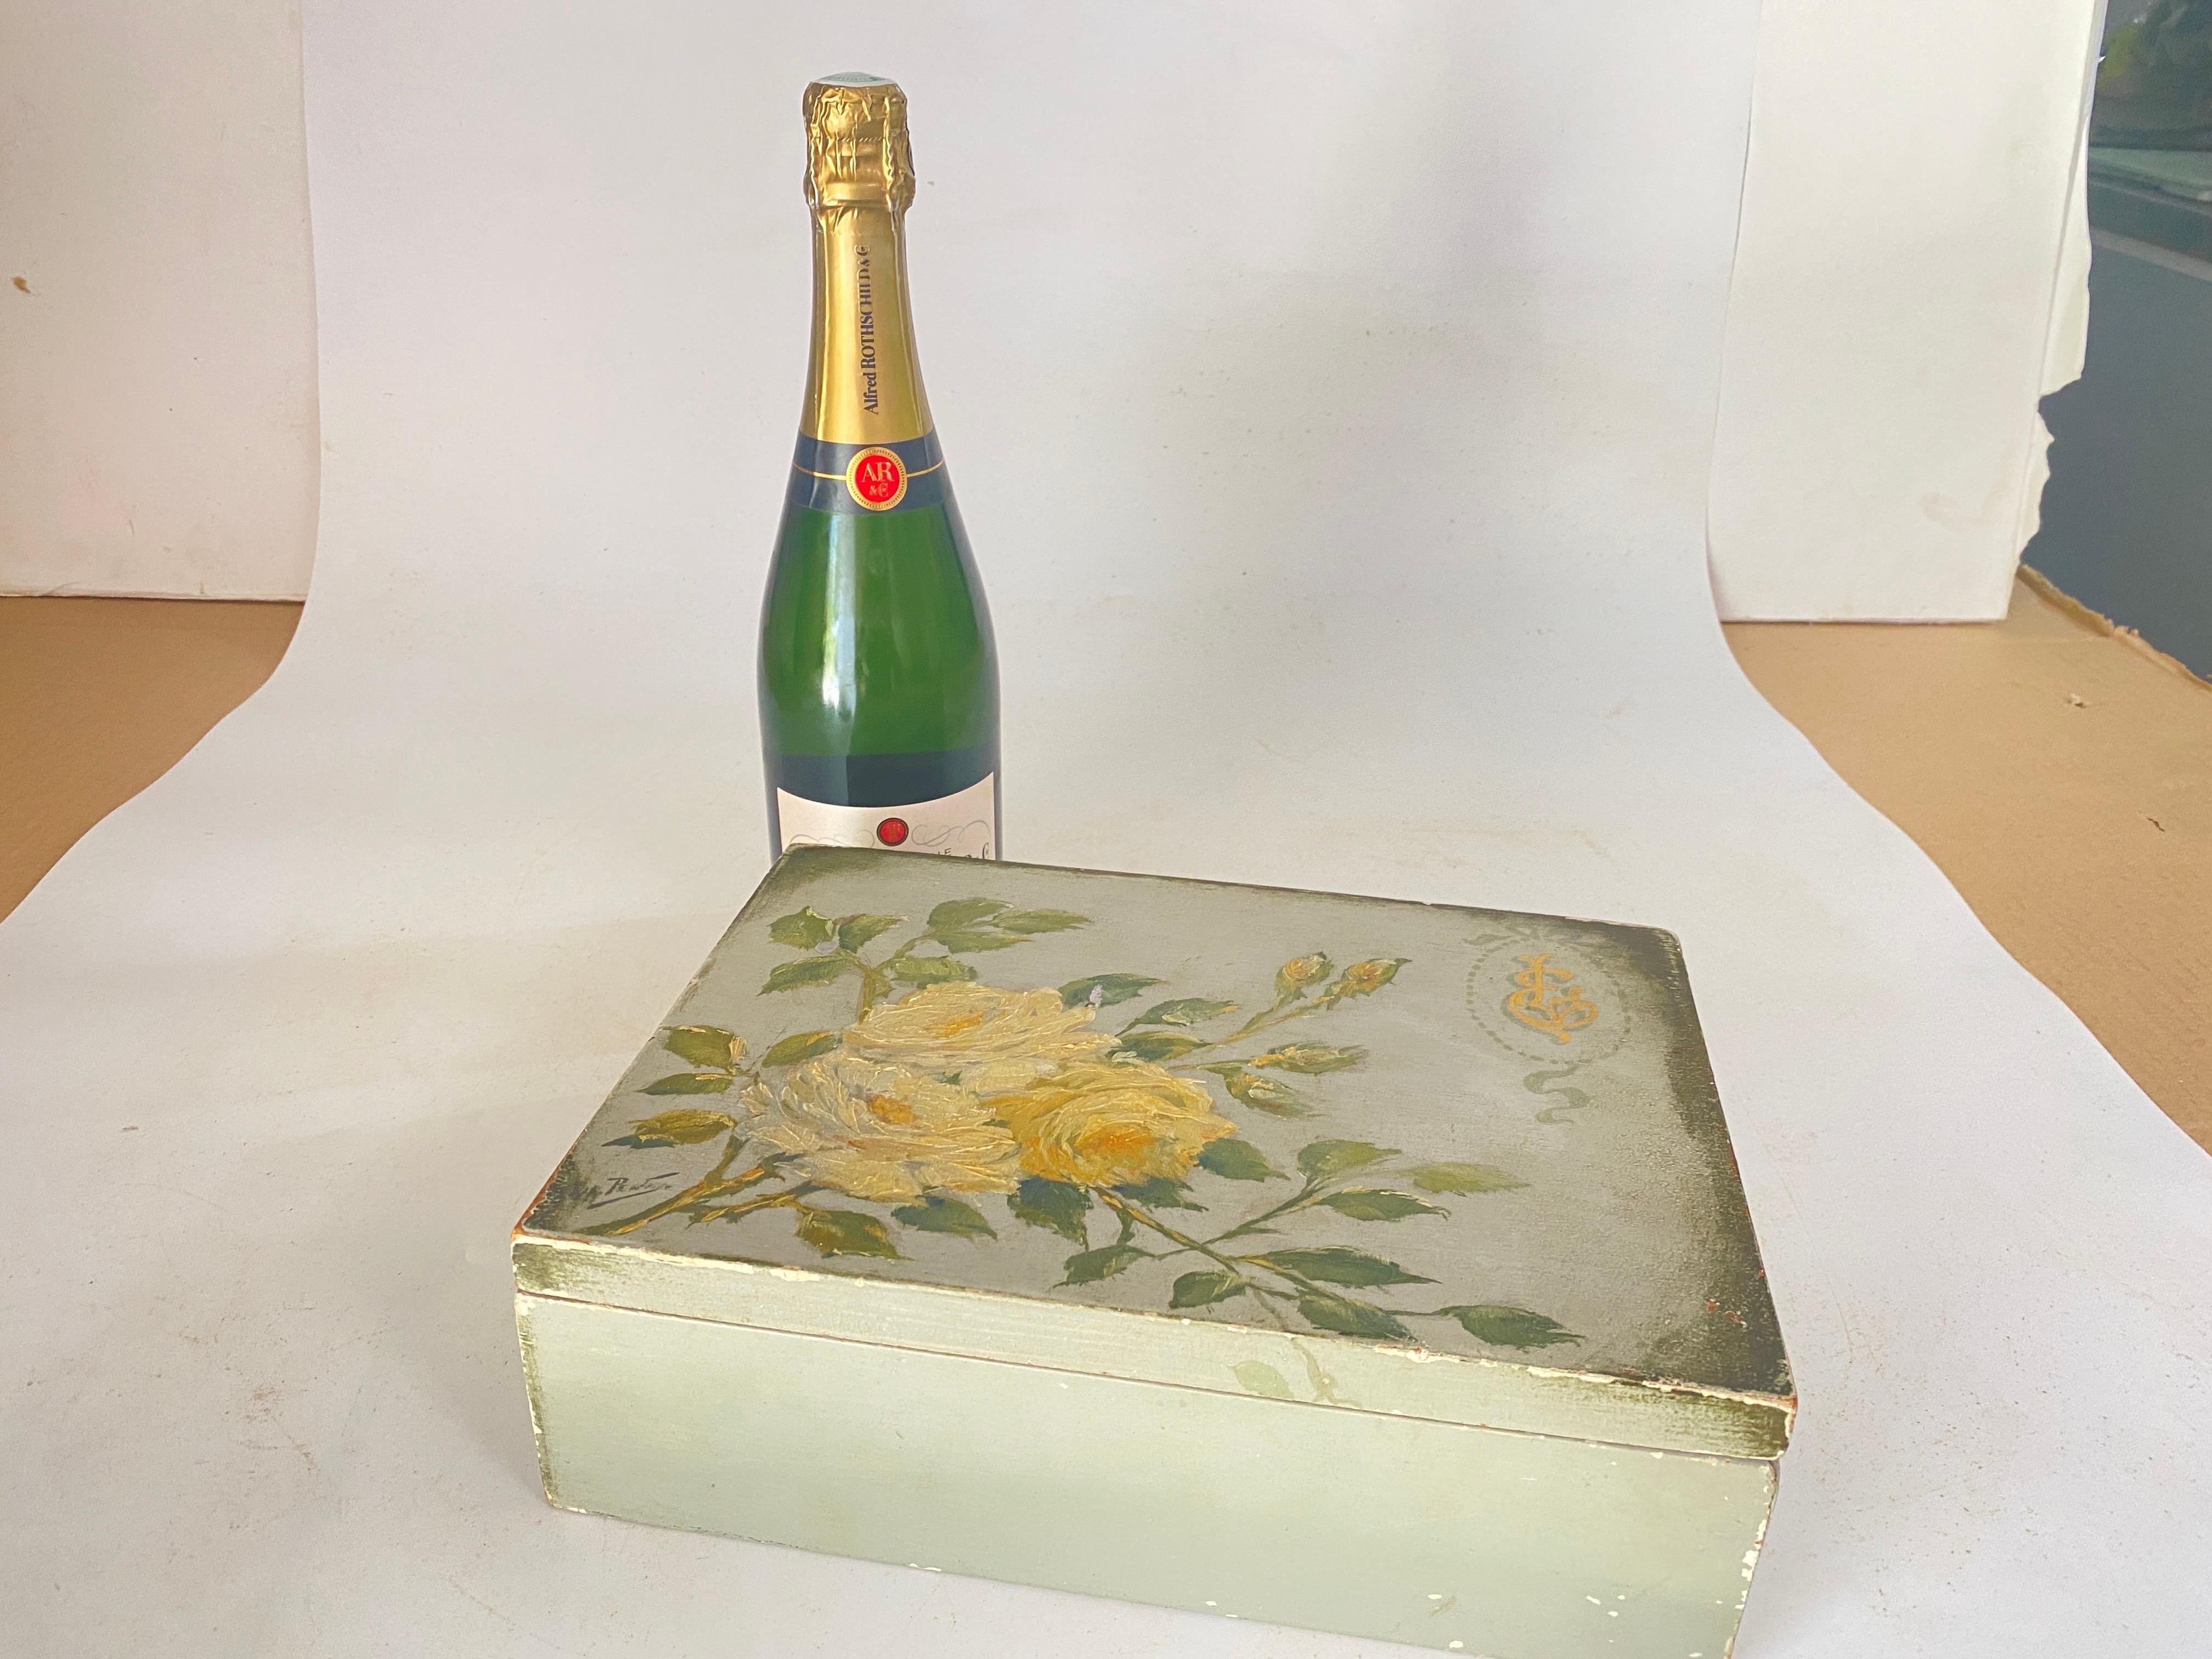 This large box is a jewelry box or a decorative box. It was made in the 19th century, in England, Period. Its lid is made in wood, Grey and Yellow in color.